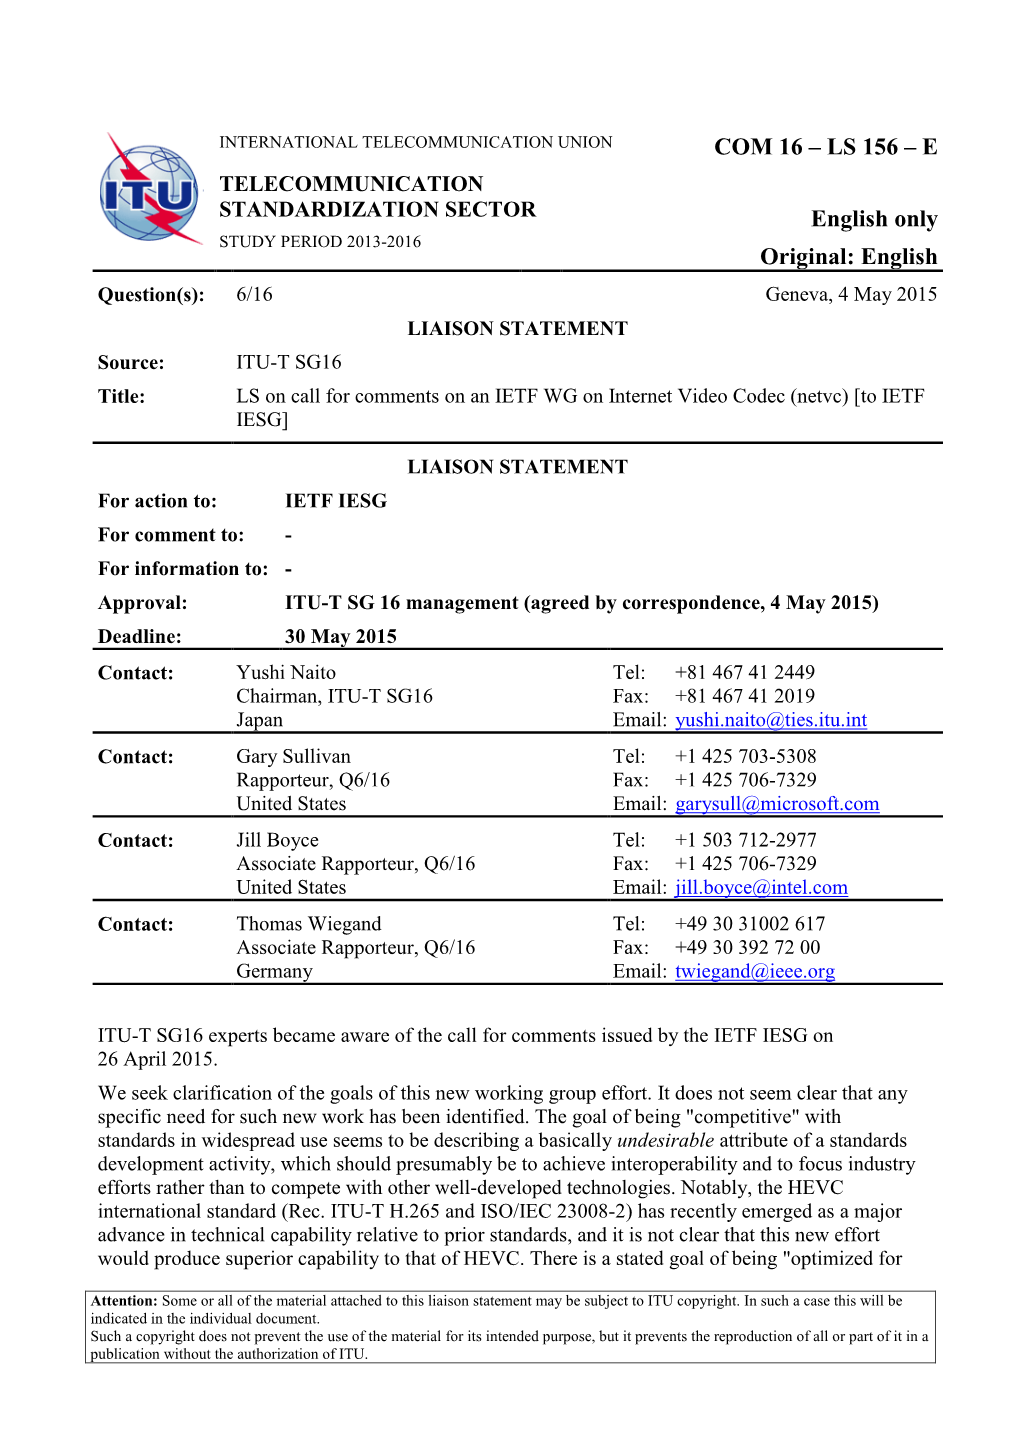 Draft LS on Call for Comments on an IETF WG on Internet Video Codec